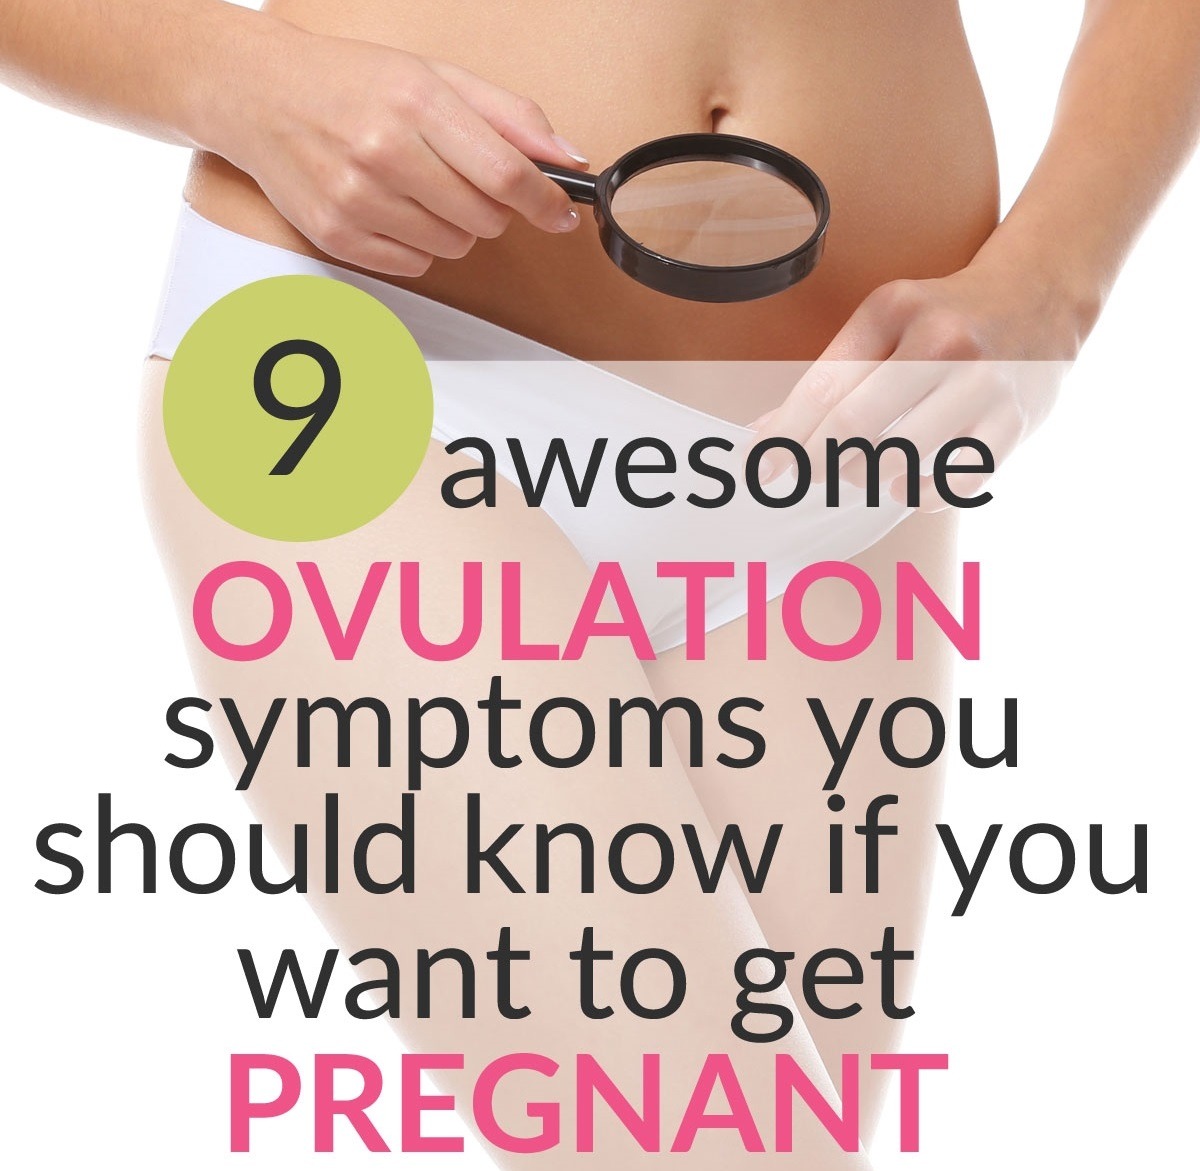 Oral sex during ovulation